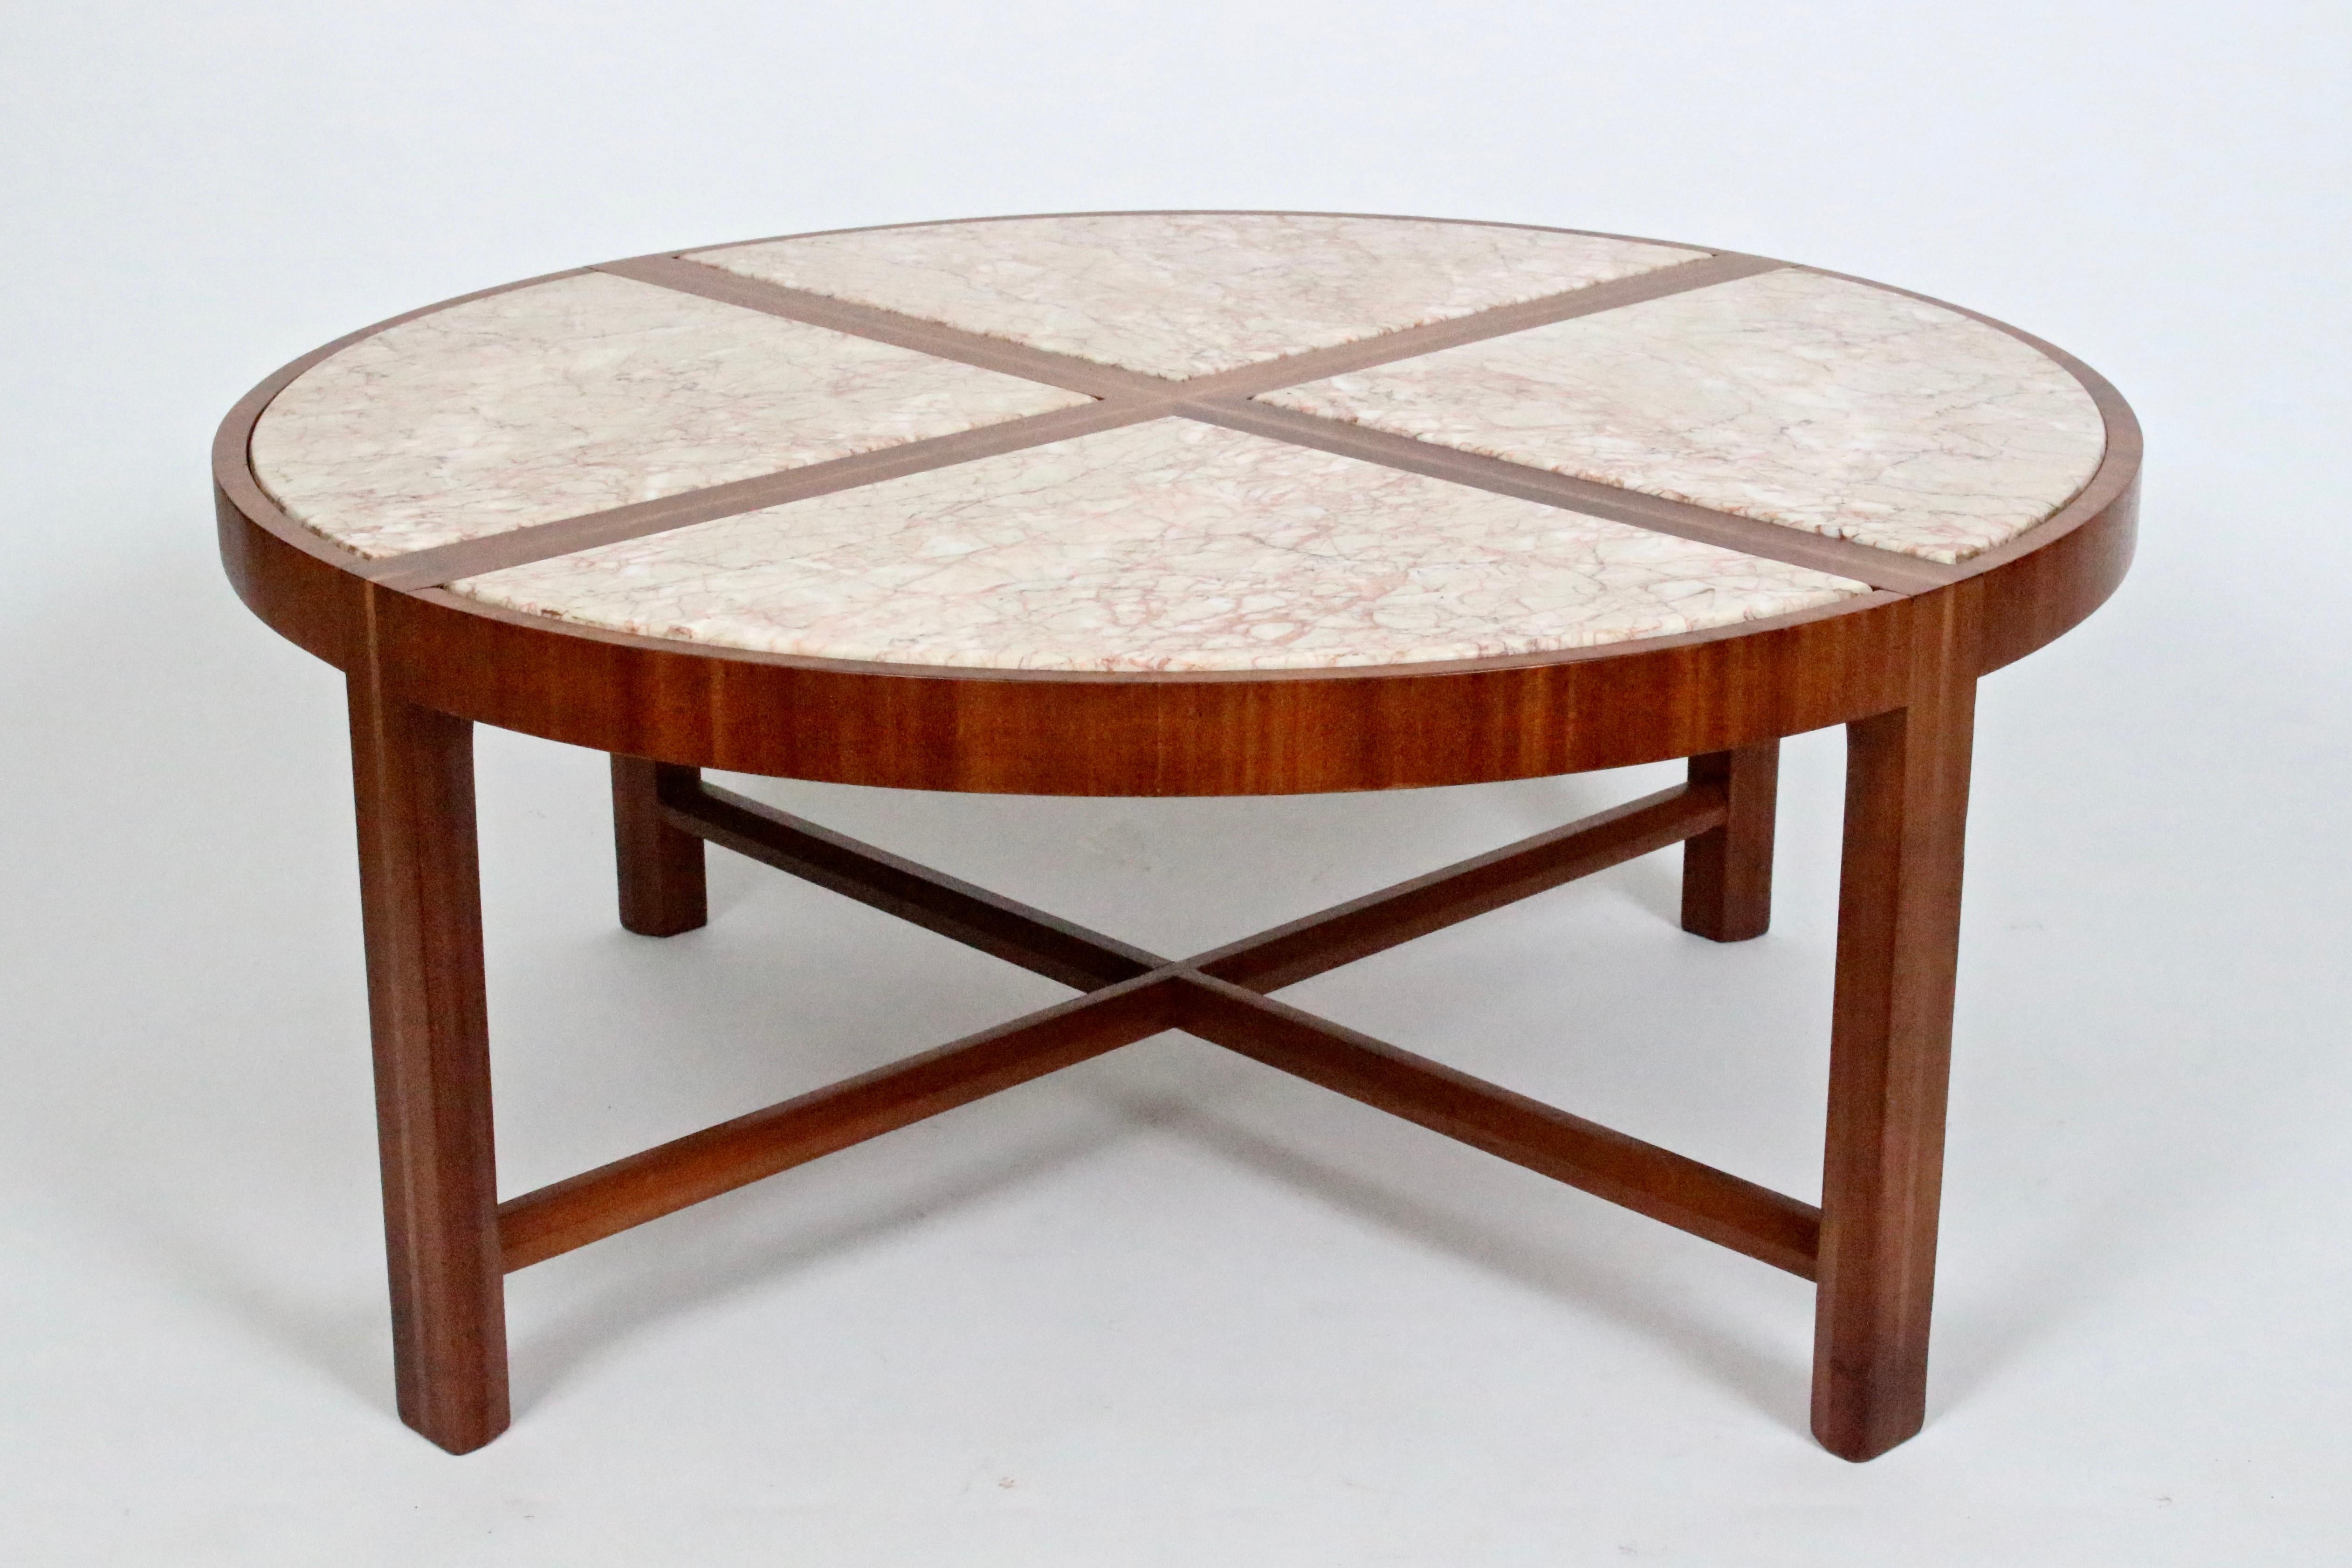 Tommi Parzinger for Charak Modern Marble and Mahogany Coffee Table, 1950s. Featuring a sturdy, inlaid mahogany framework, circular surface divided quadrant area inset with Rosa Norvegia marble. Hues in pink, cream and white. Total 5 pieces. Should